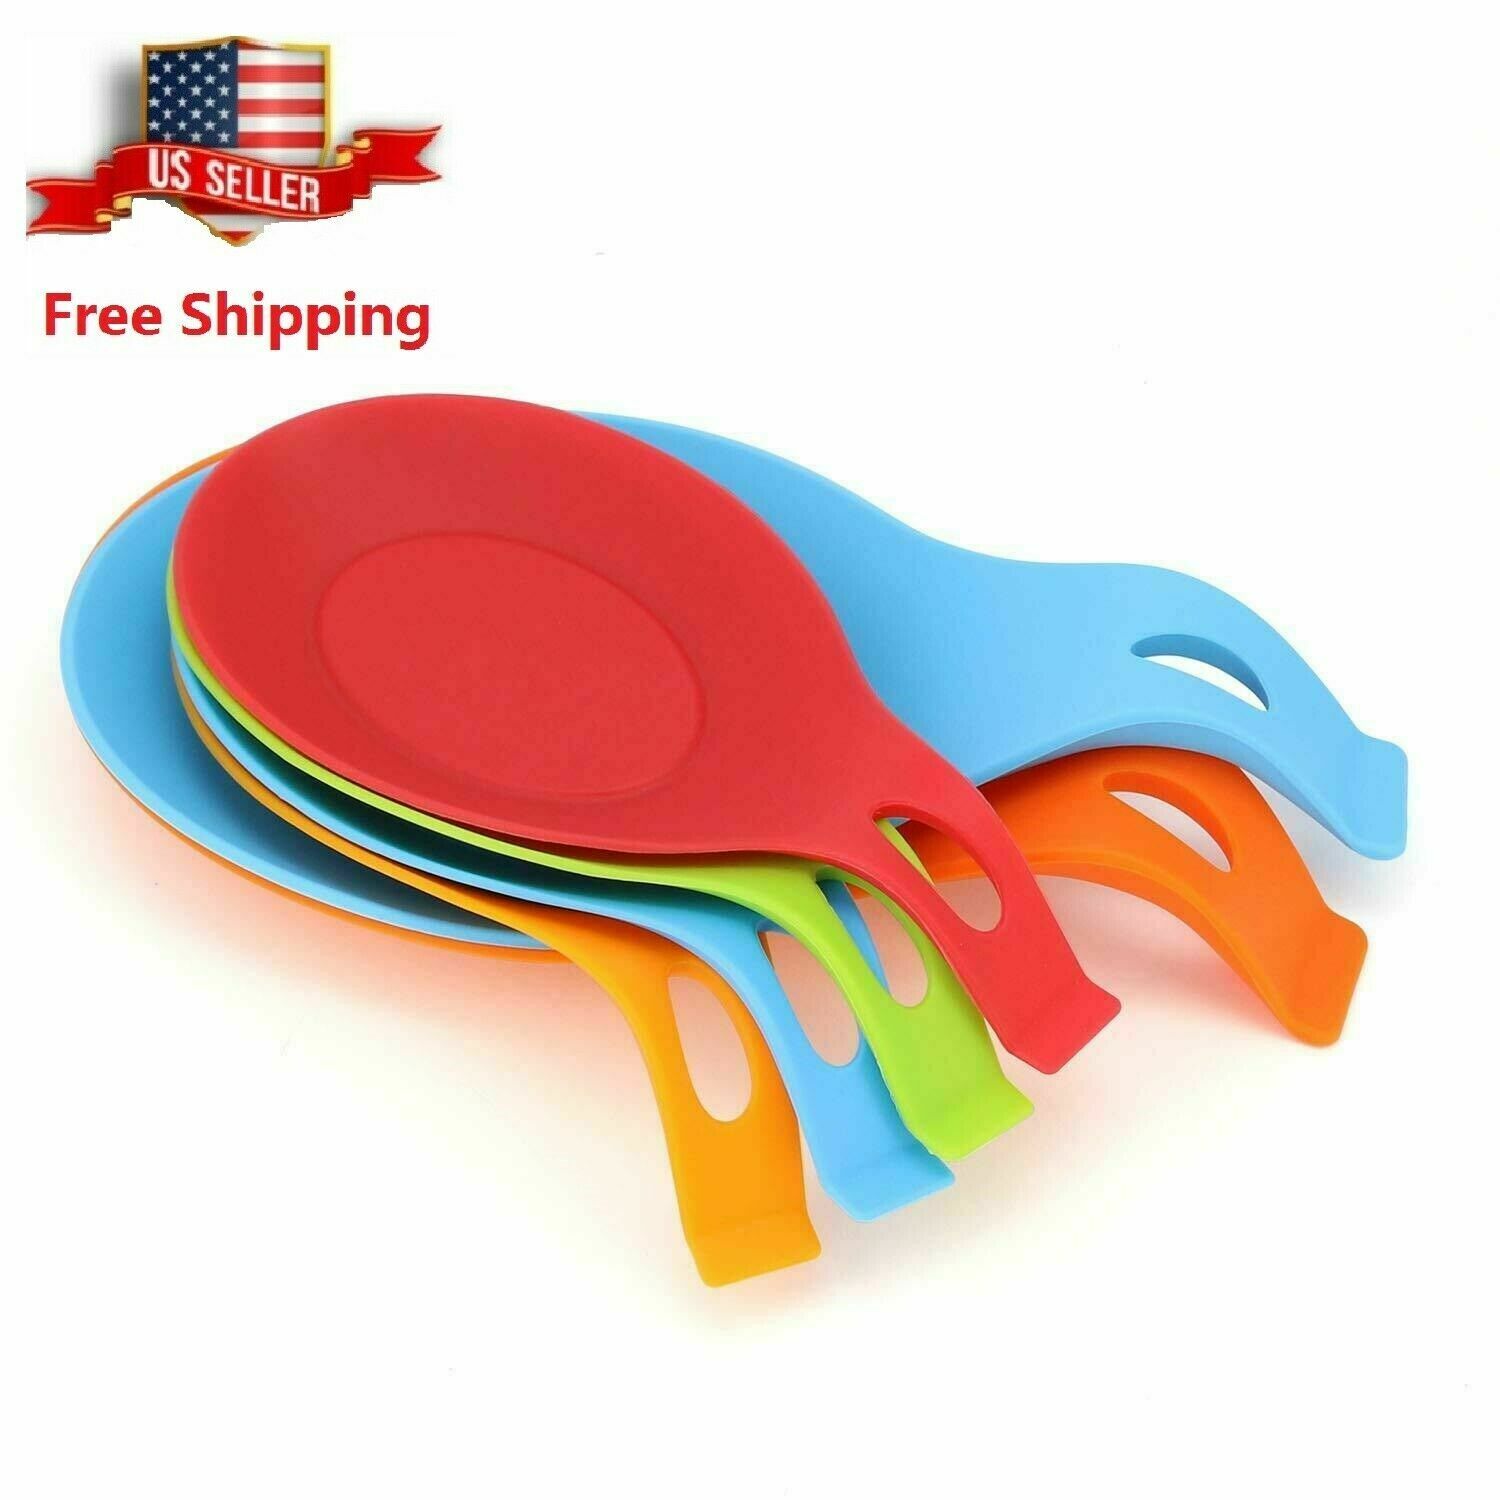 6 Pc Kitchen Silicone Spoon Rest Heat Resistant Utensil Rest Ladle Spoon Holder